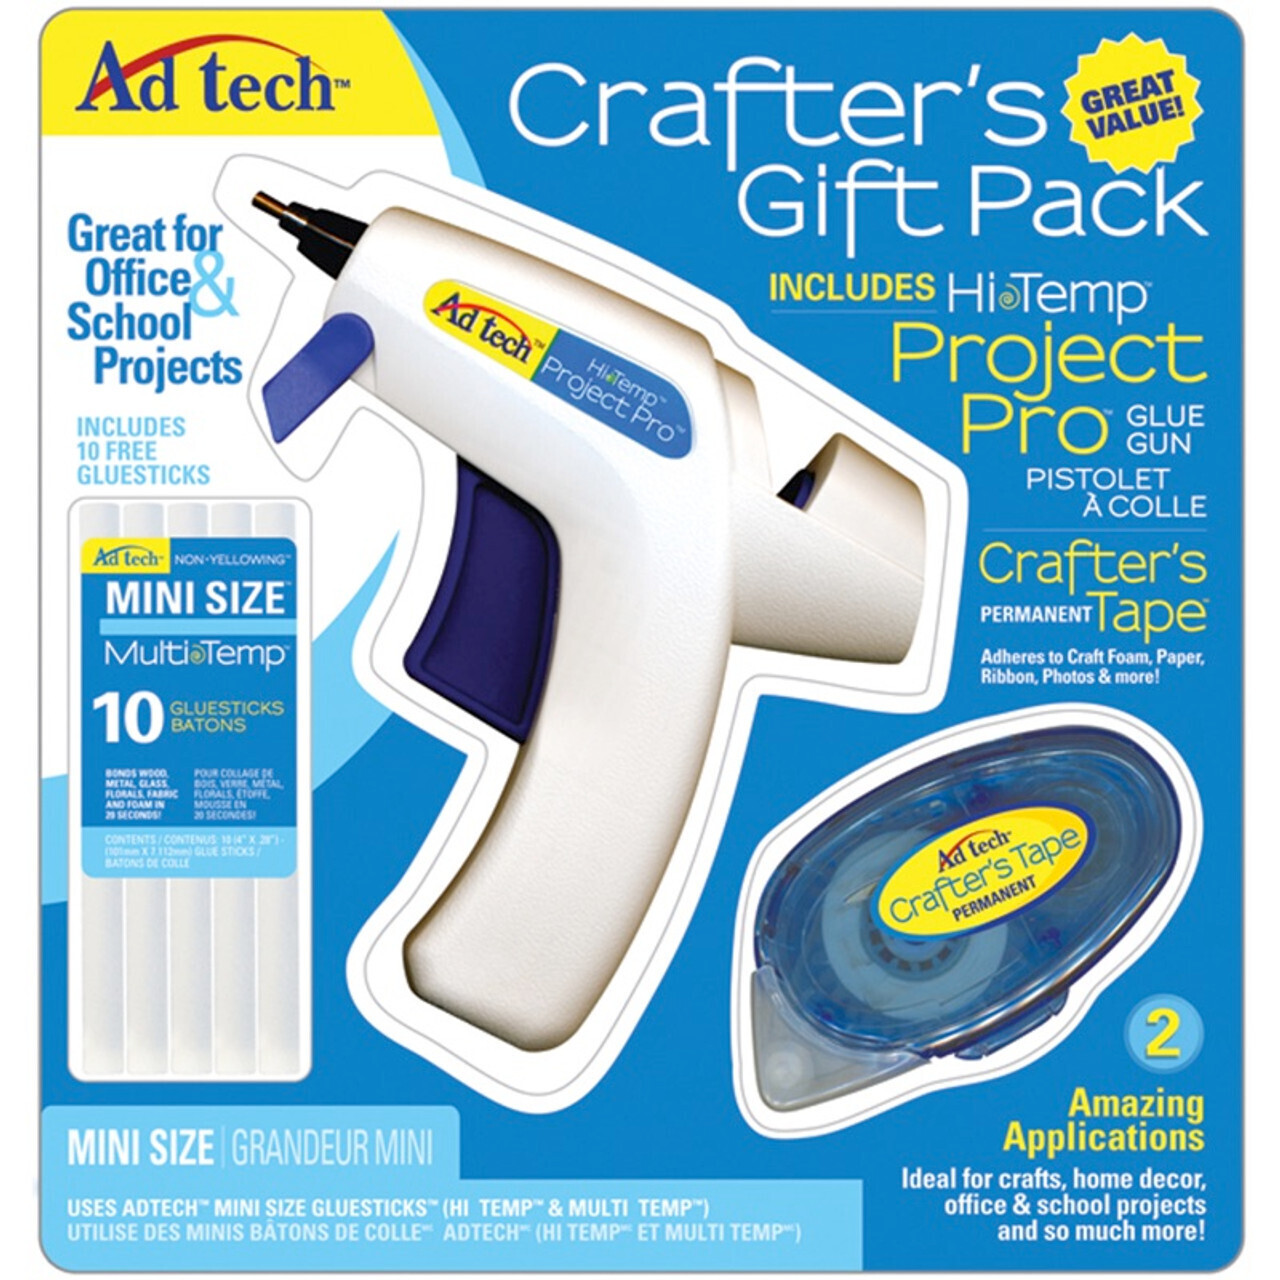 AdTech Crafter’s Gift Pack